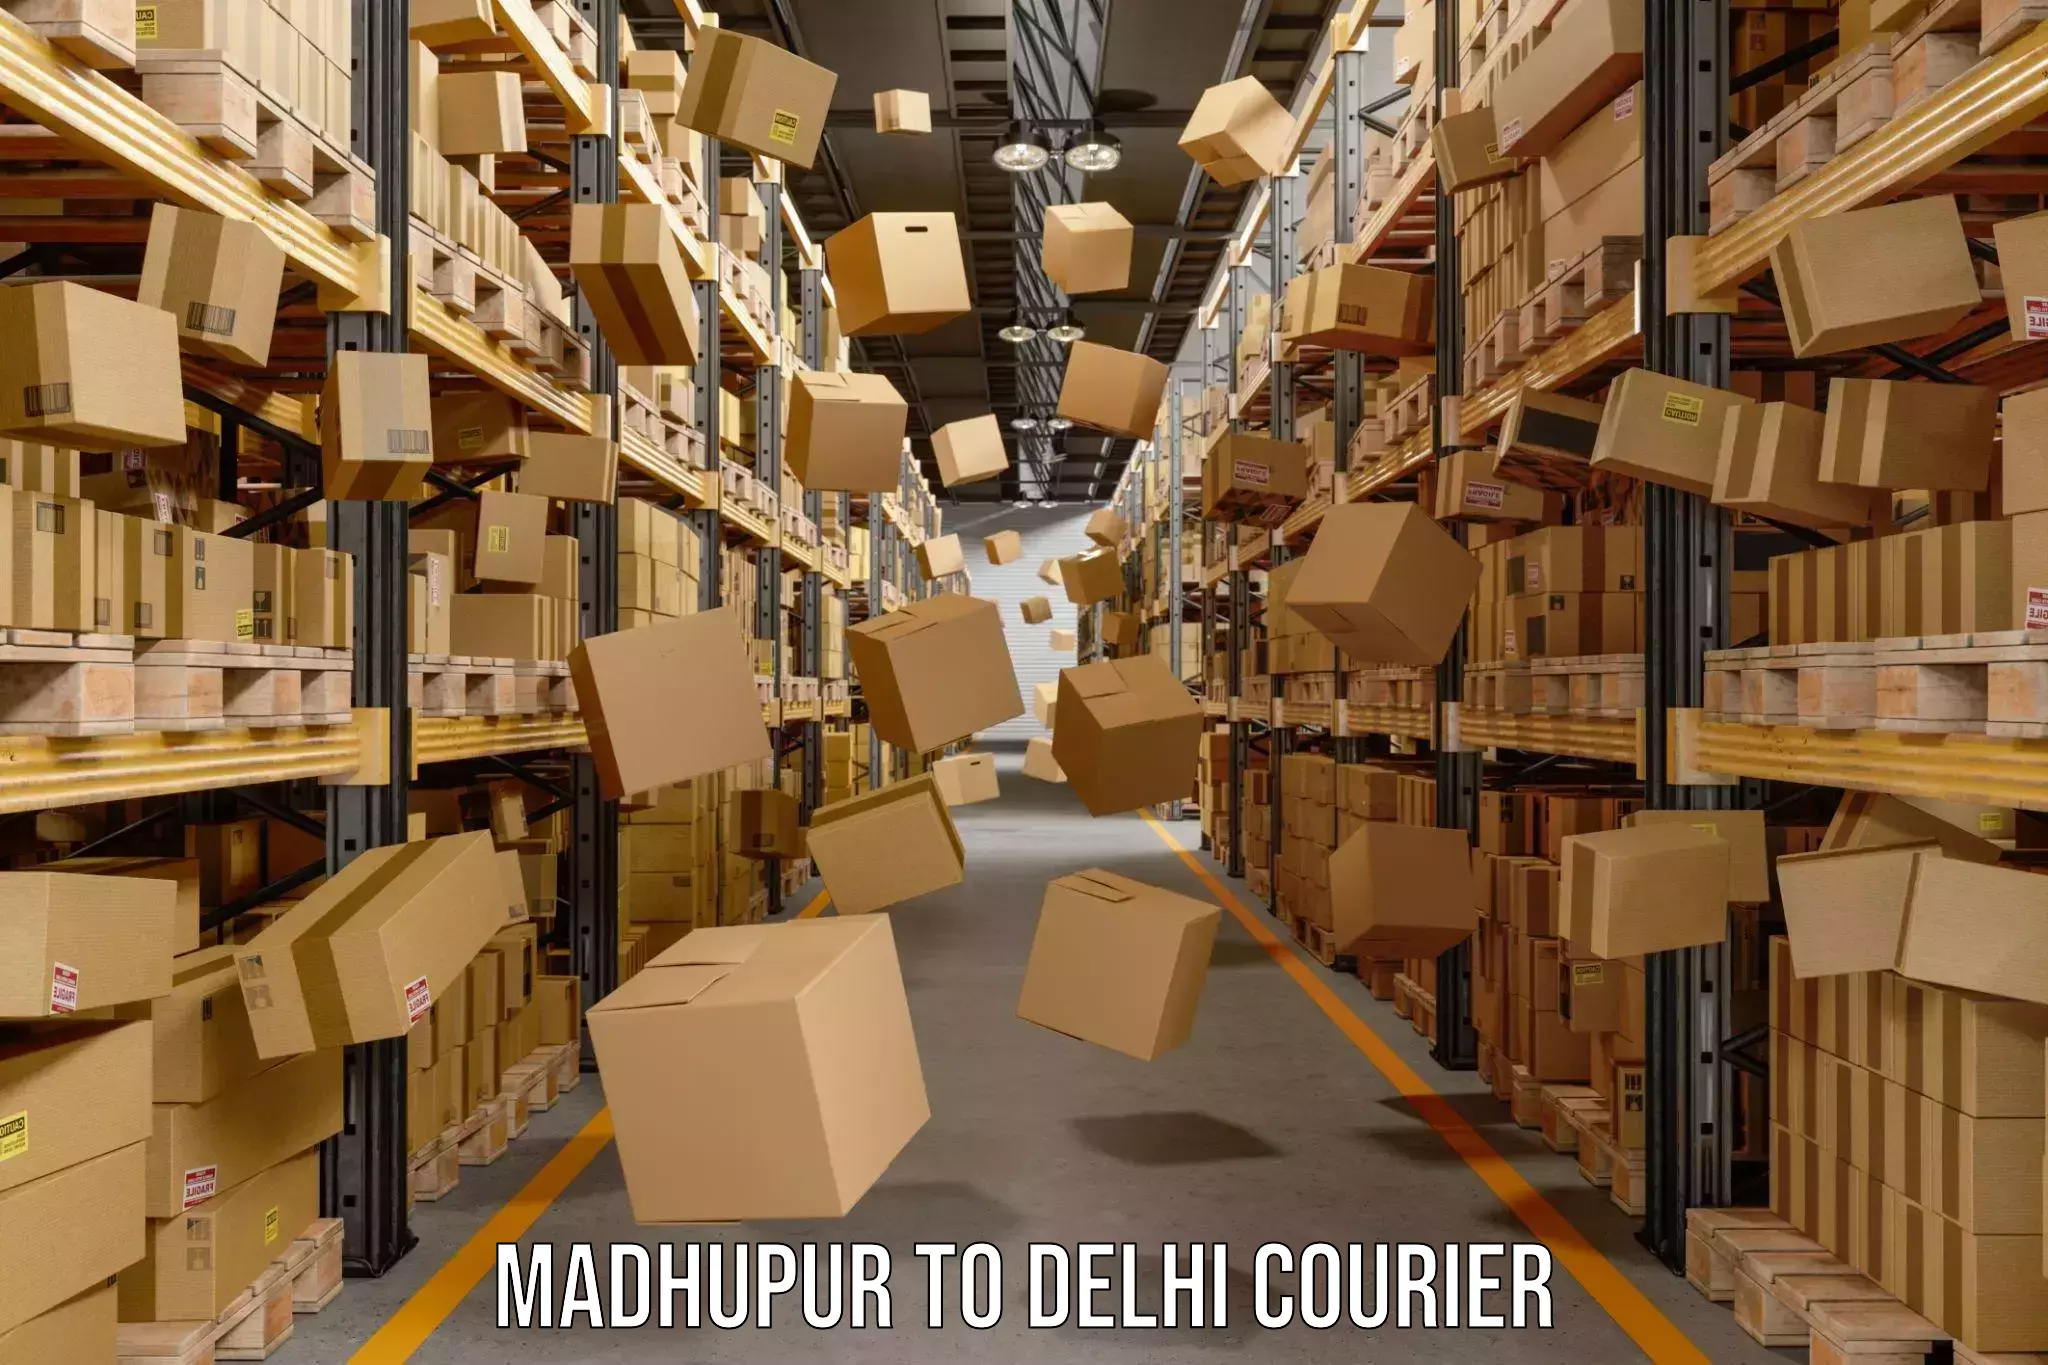 Next-day delivery options Madhupur to Delhi